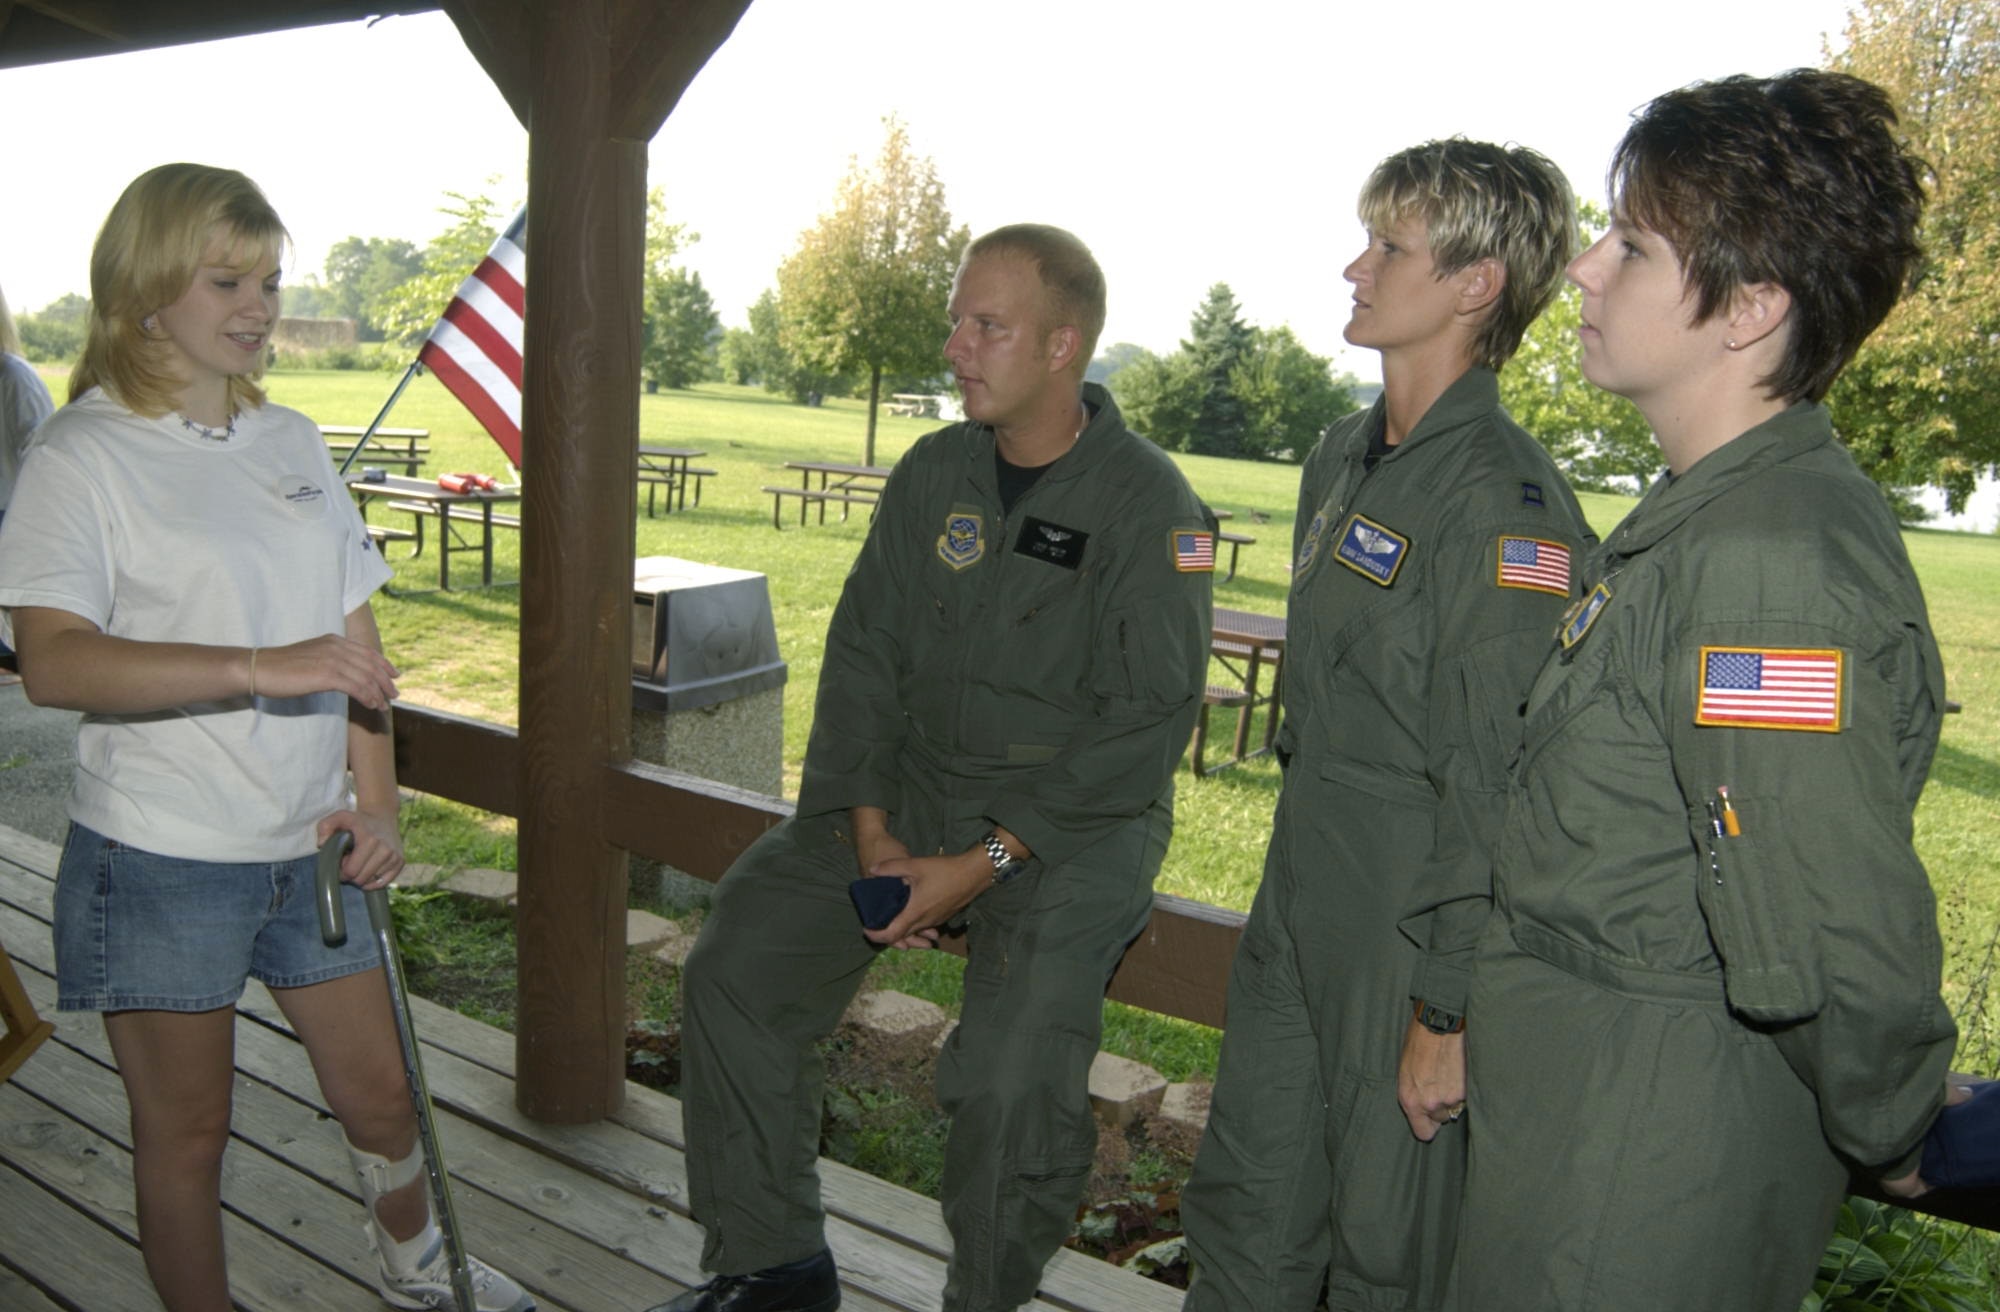 WRIGHT-PATTERSON AIR FORCE BASE, Ohio -- Jessica Lynch, a former Army prisoner of war, speaks with Airmen from the 445th Airlift Wing here Aug. 3. Tech. Sgt. Hans Jagow, Capt. Kimm Sandusky and Staff Sgt. Sandi Golden-Vest helped transport Ms. Lynch back to the United States in April 2003.  This meeting was the first time they had met face-to-face.  (U.S. Air Force photo by Spencer P. Lane)